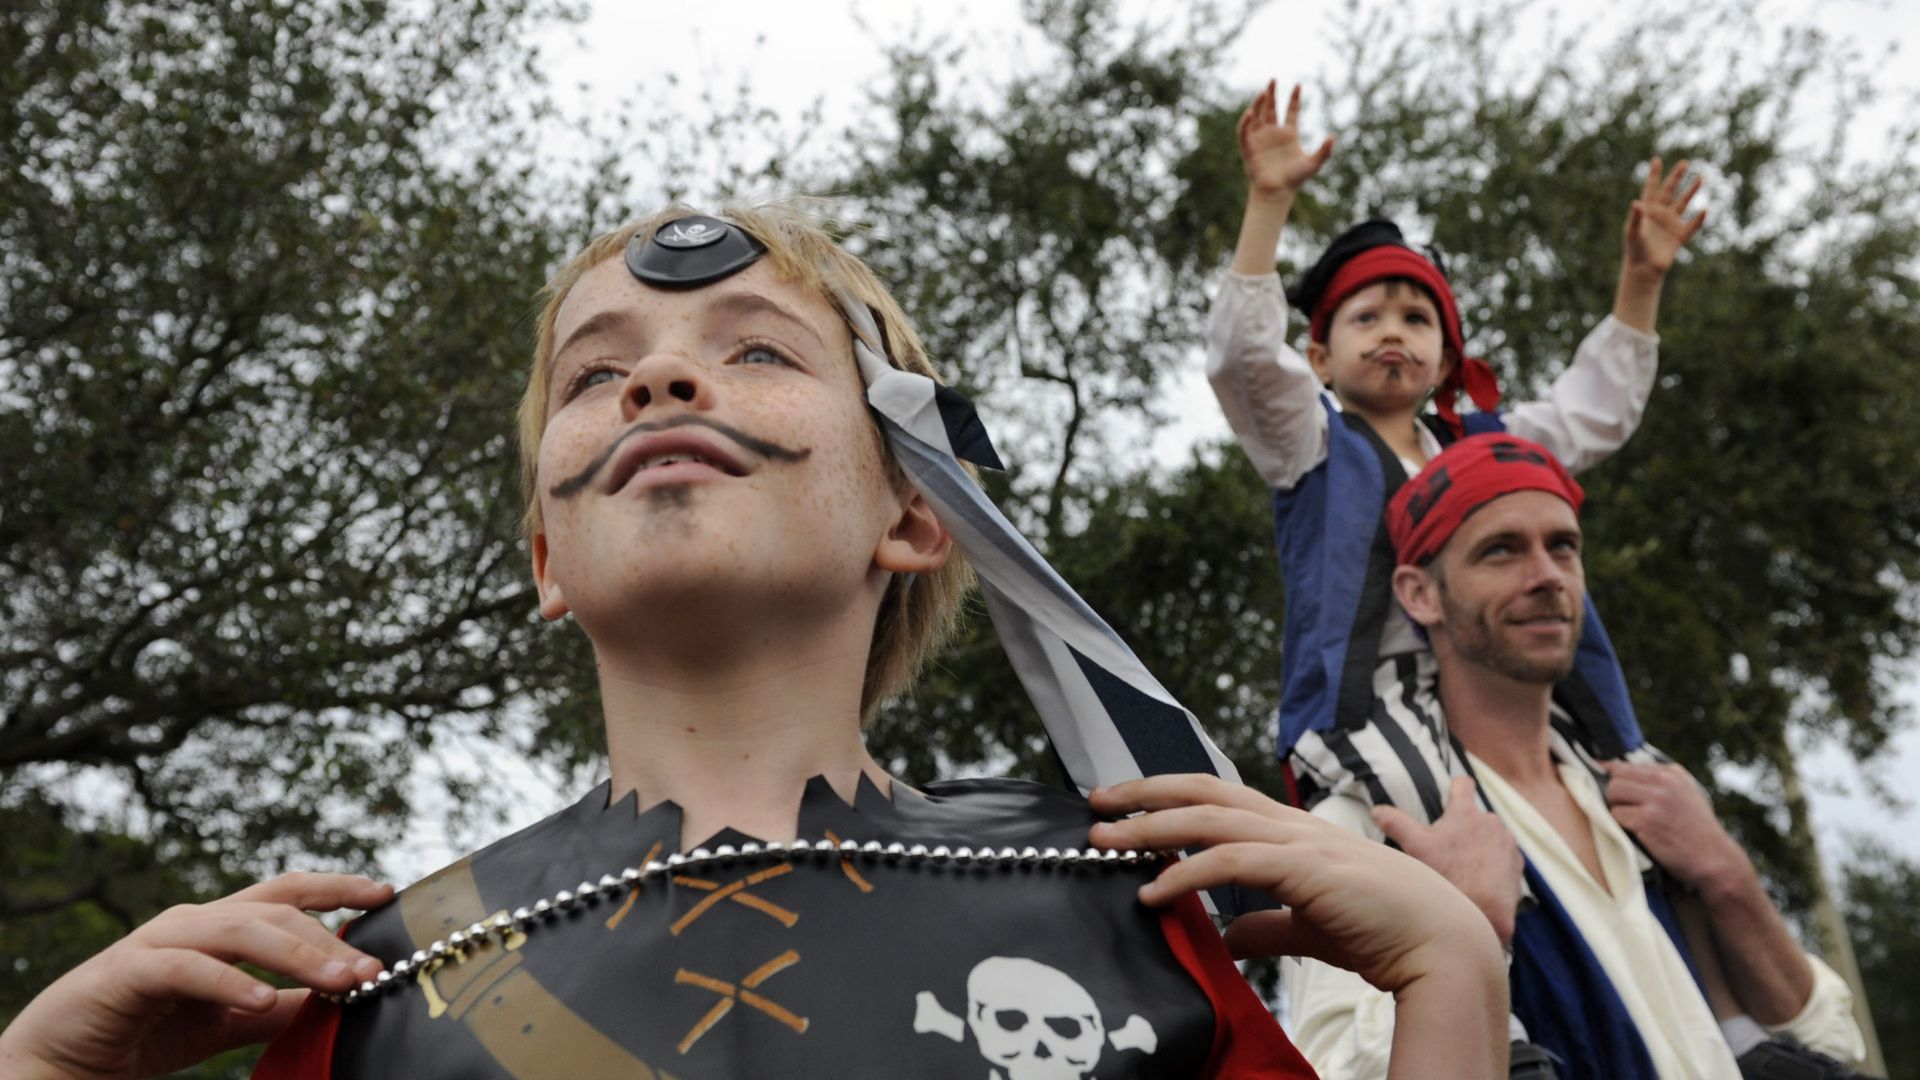 Kids wait for beads during gasparilla parade